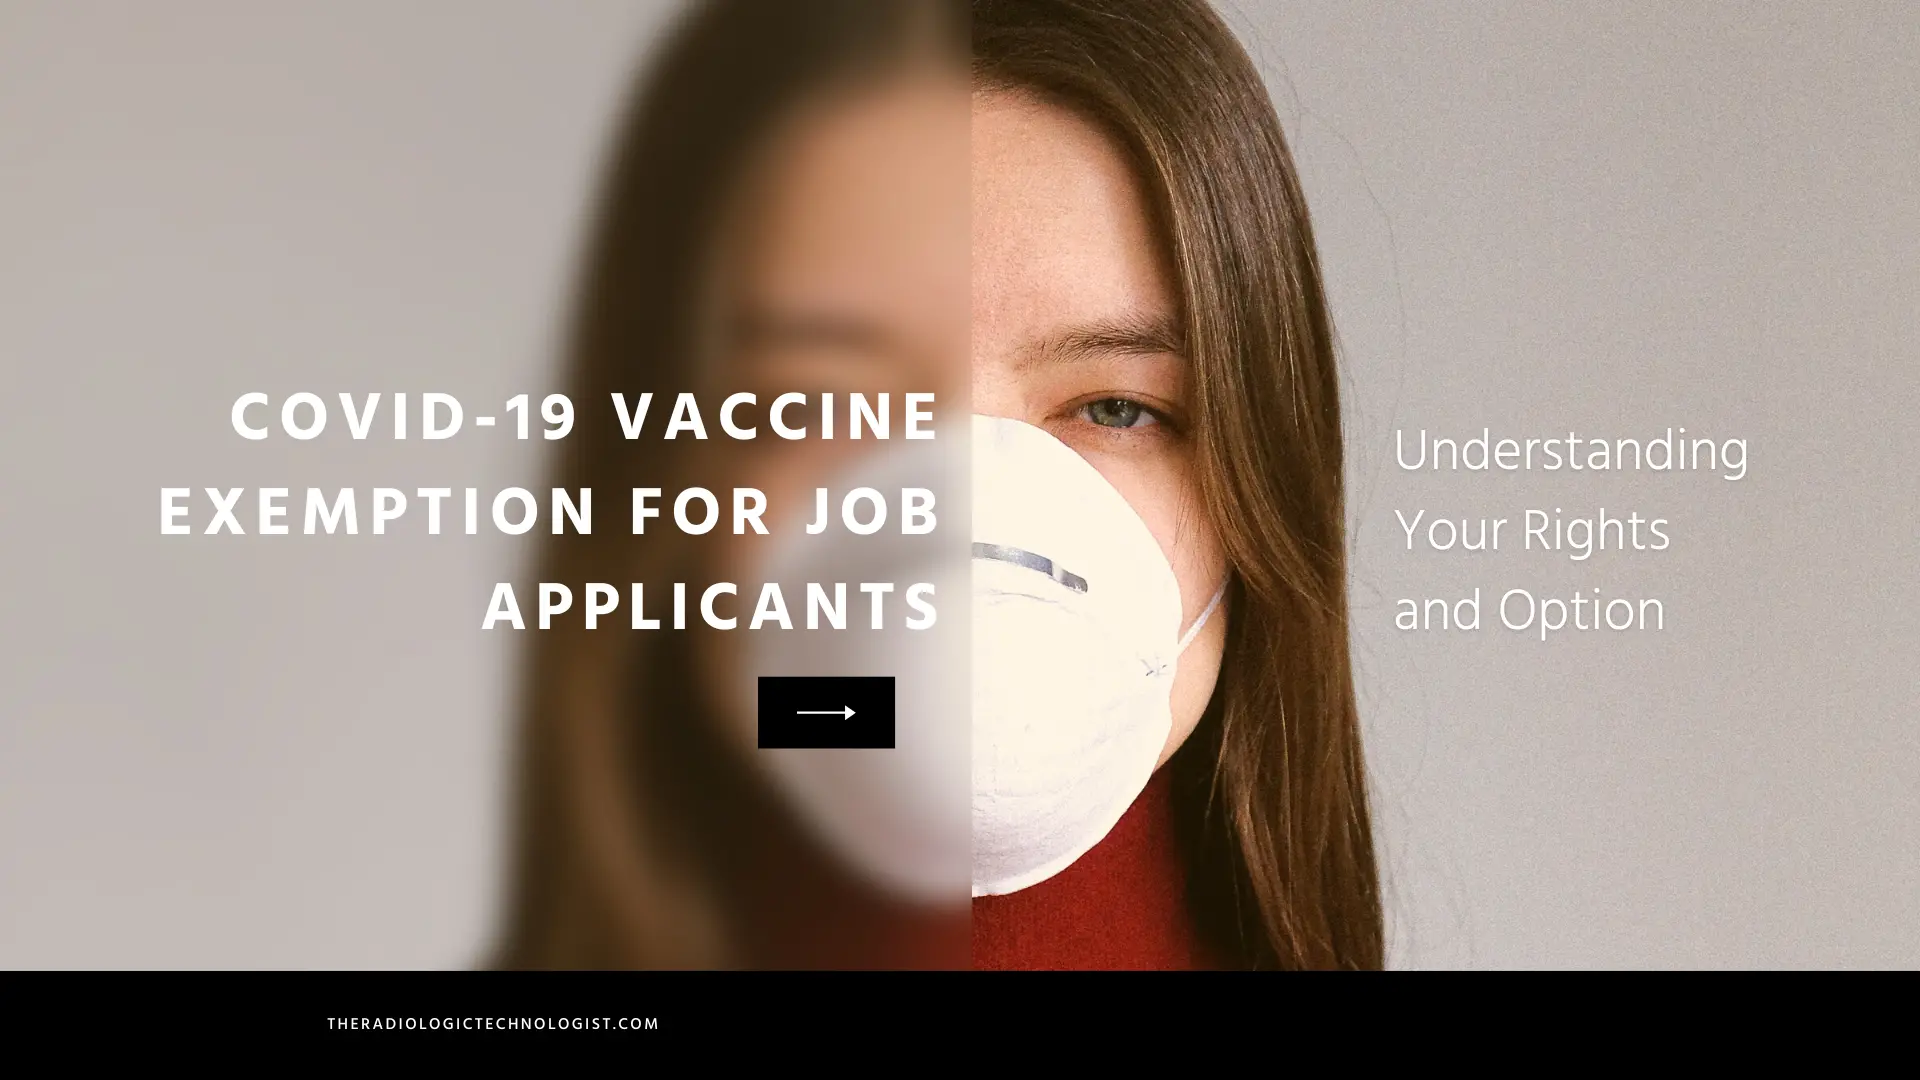 COVID-19 vaccine exemption for job applicants